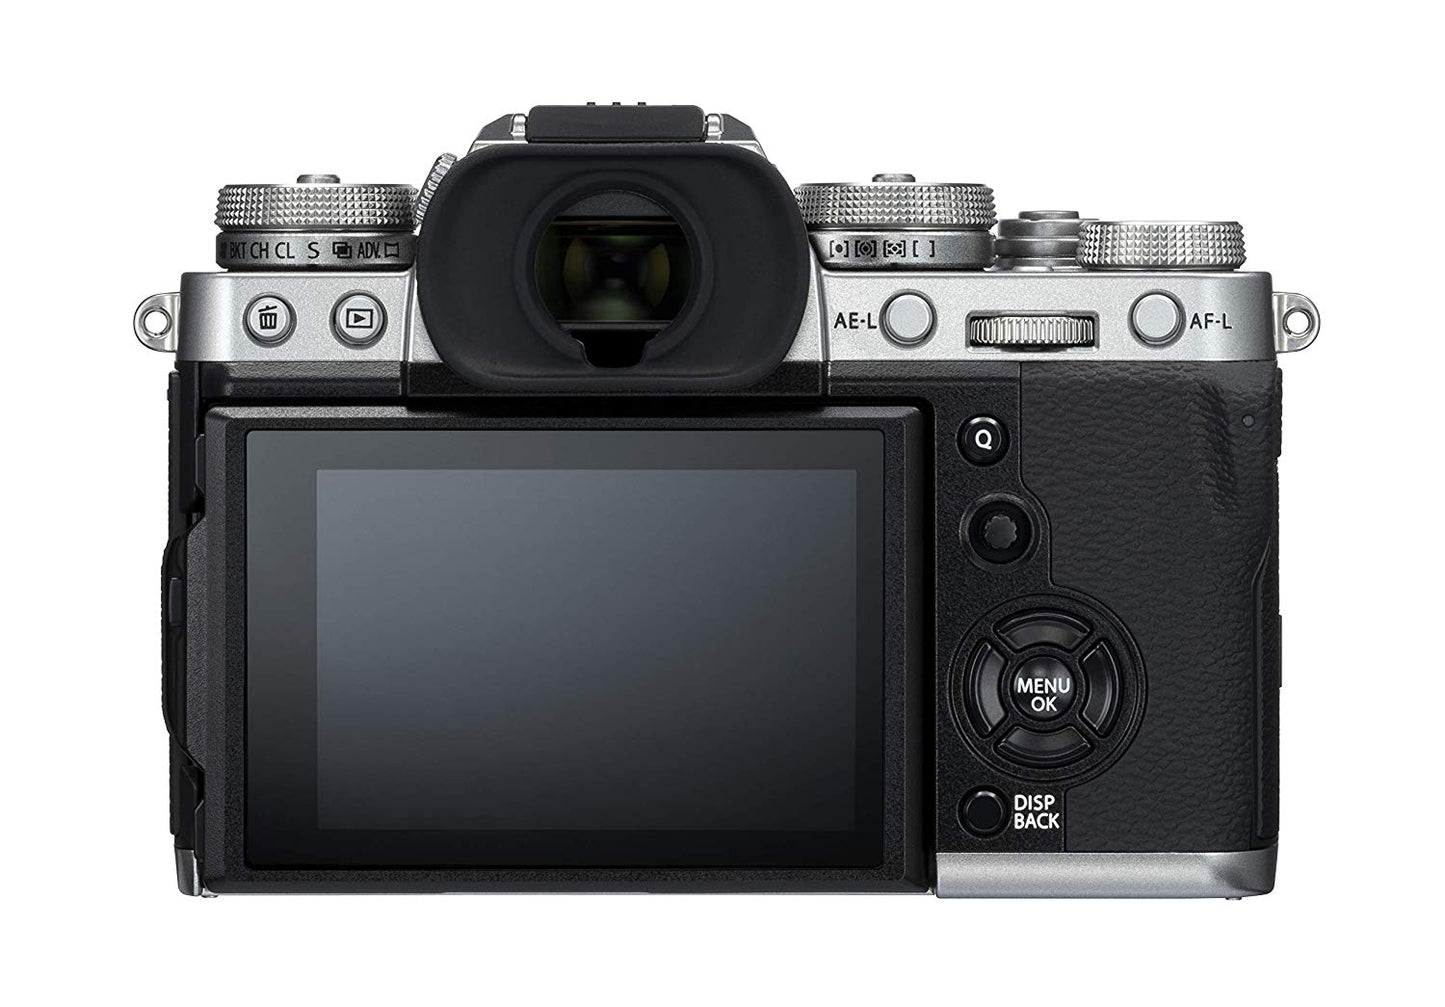 FUJIFILM X-T3 Mirrorless Digital Camera (Body Only) (Black and Silver Color Variation)